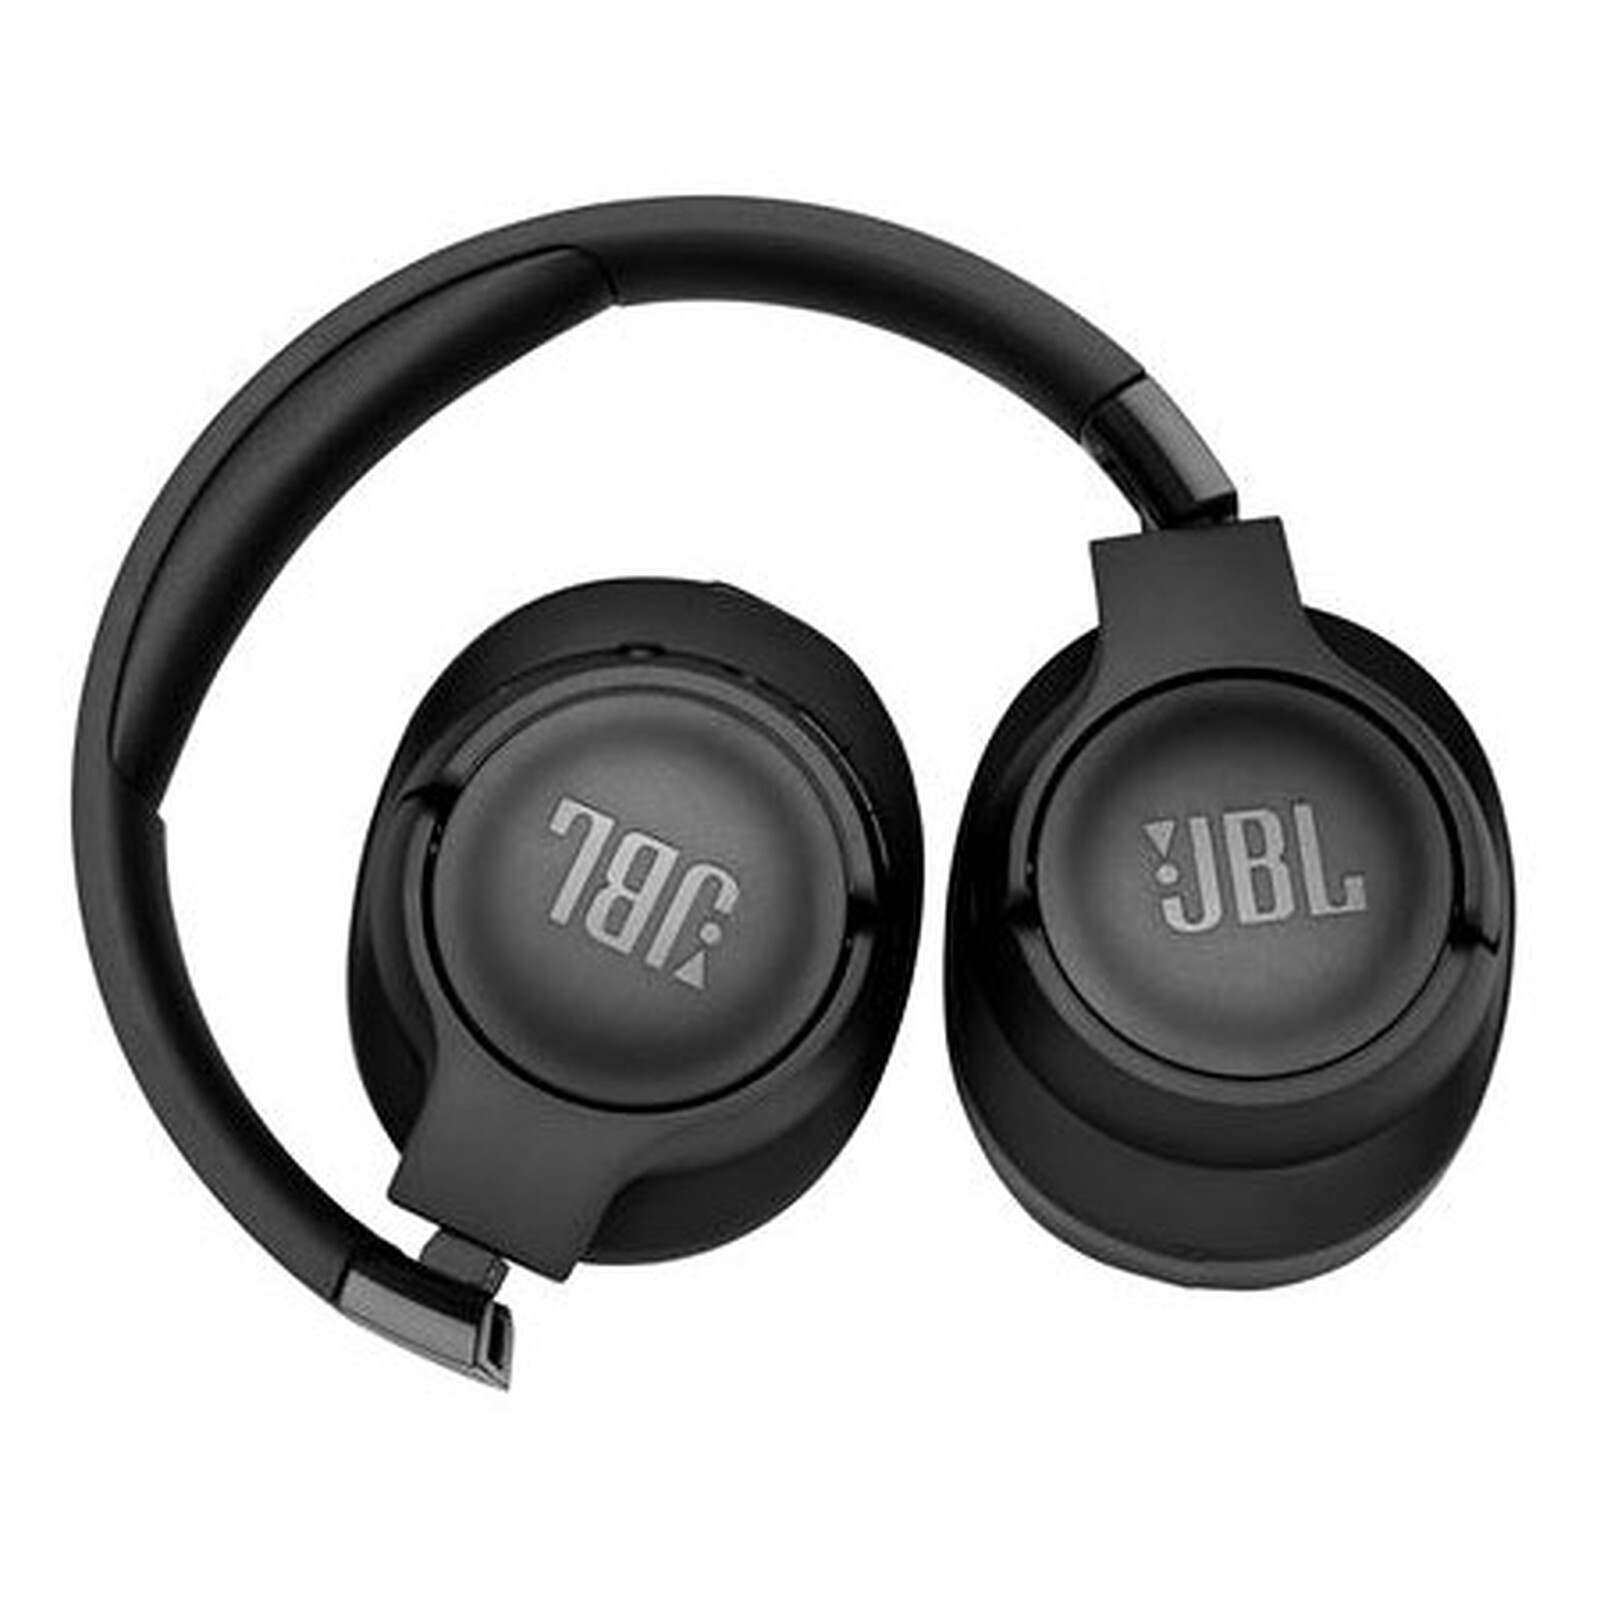 Buy JBL Tune 710BT Wireless Bluetooth Headphone with 50 Hours of